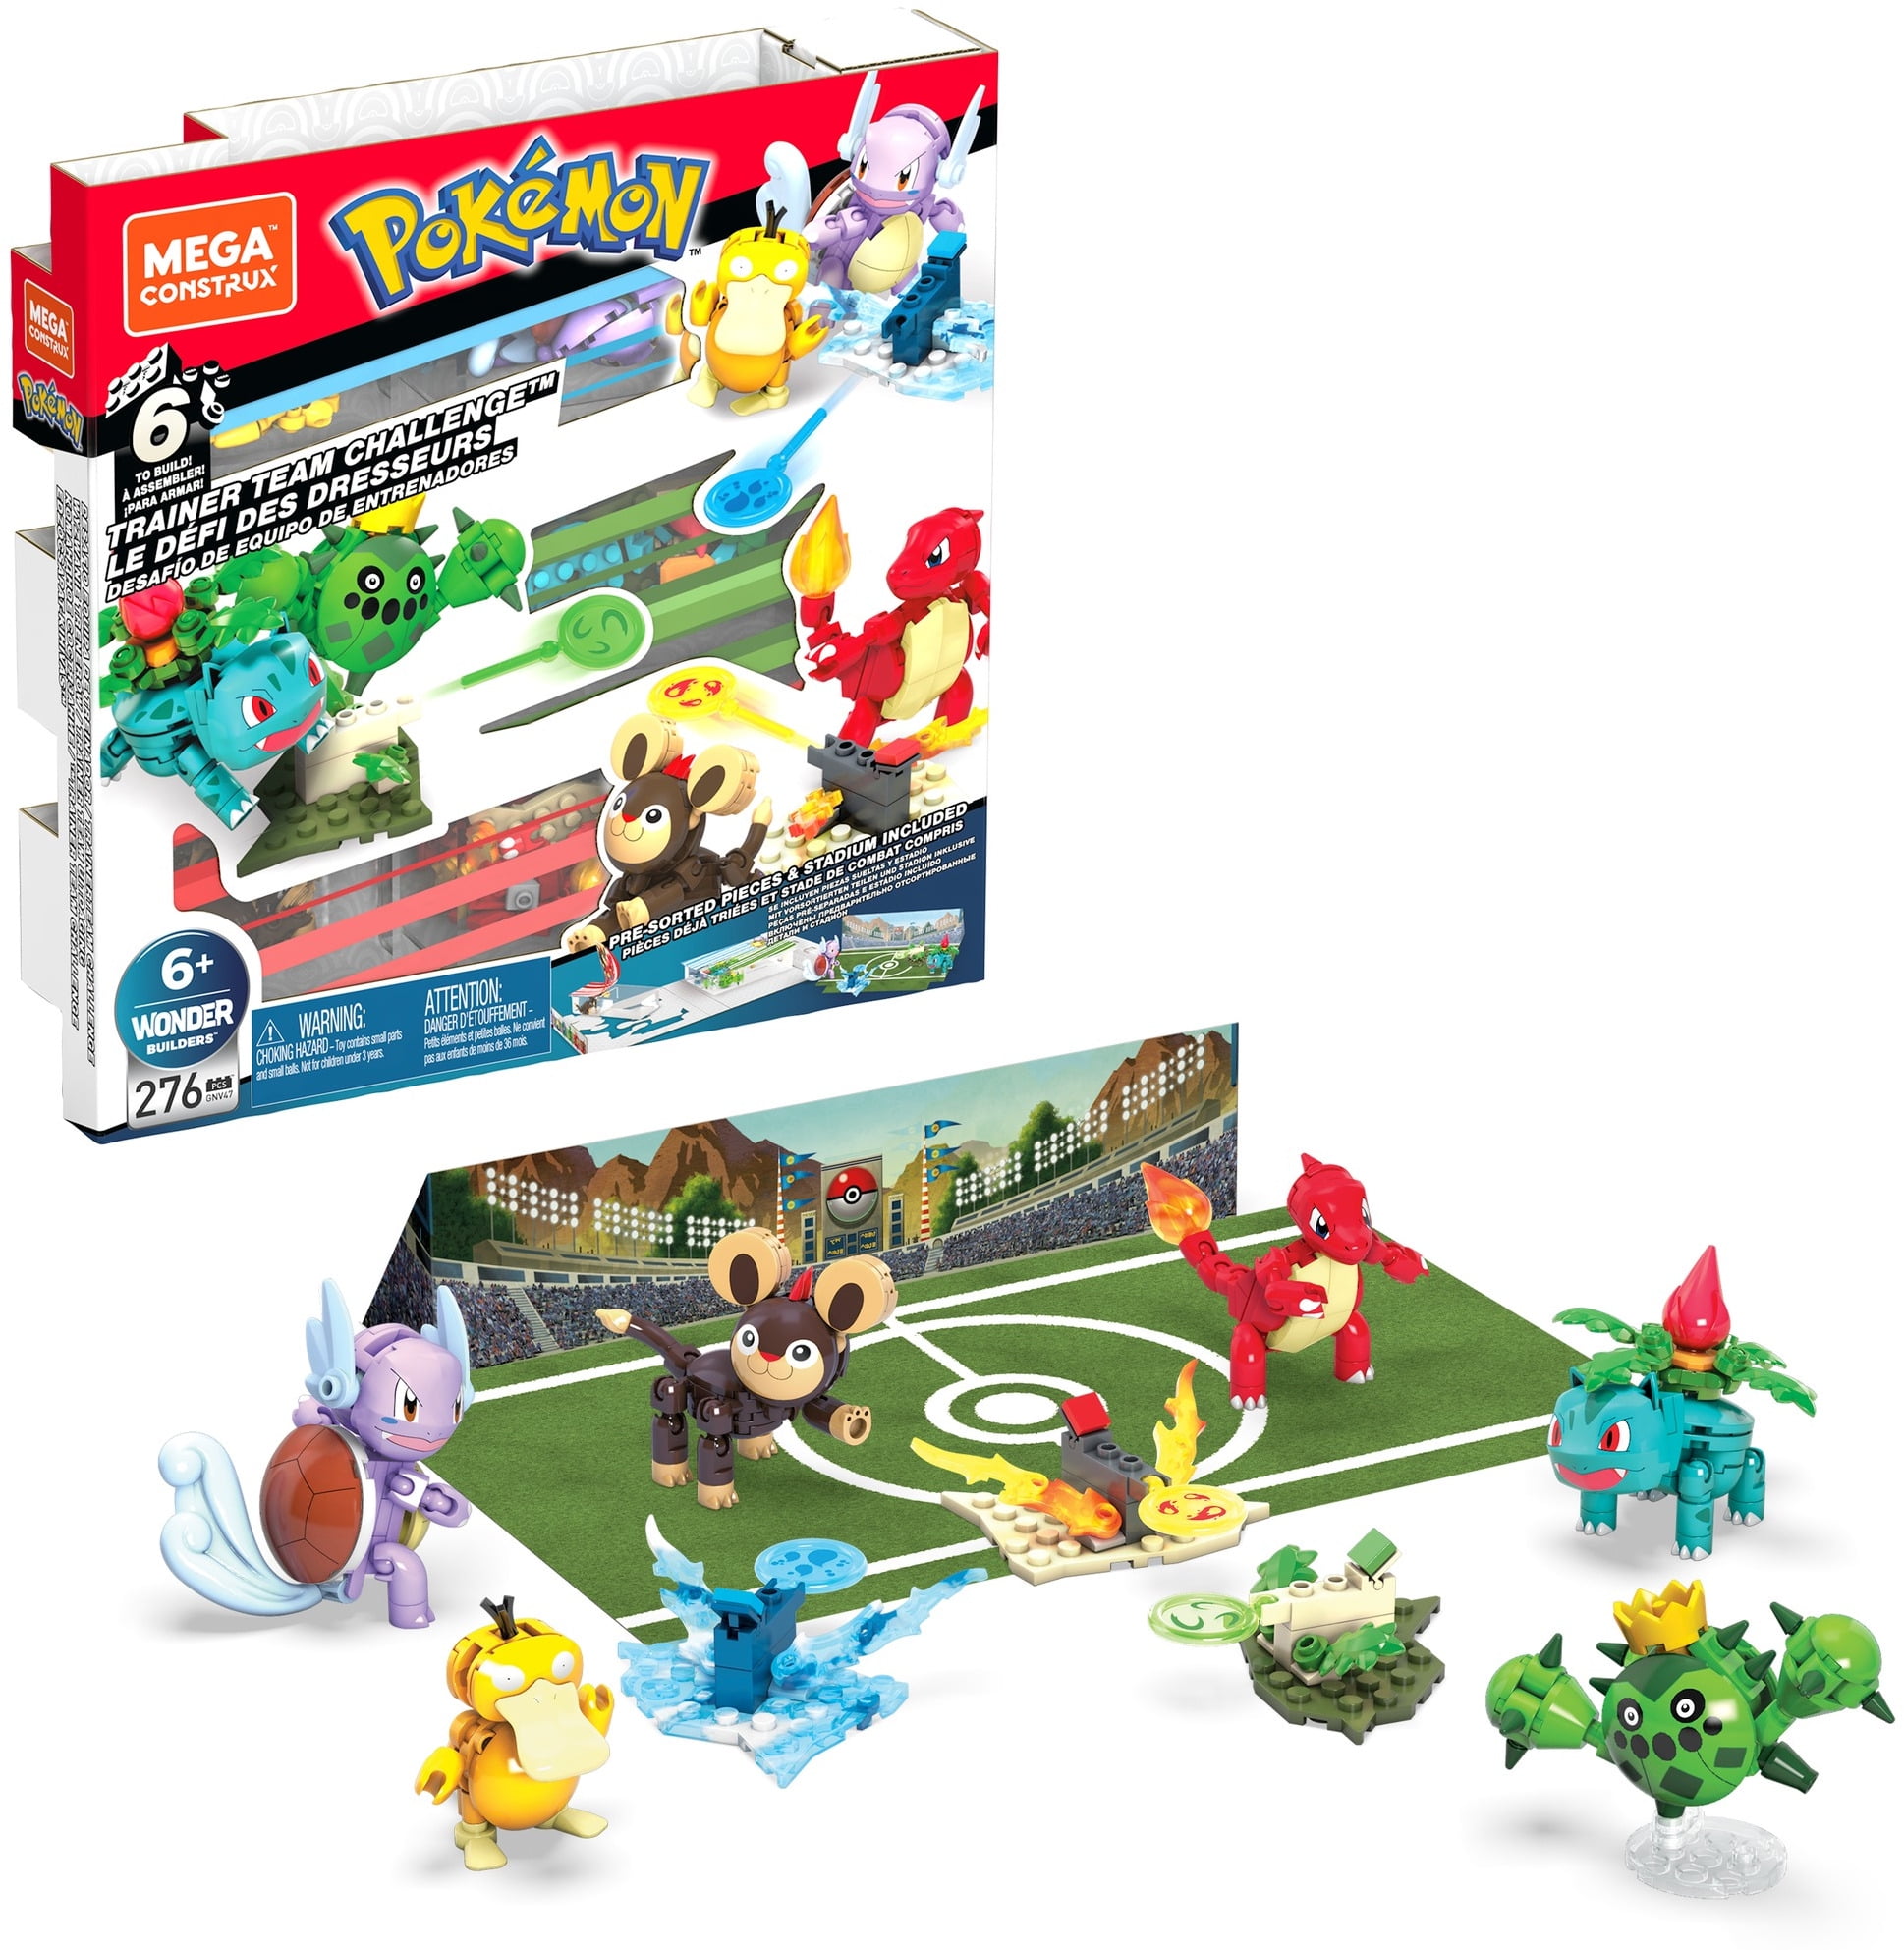 MEGA Pokémon Action Figure Building Toys Set for Kids, Trainer Team  Challenge with 450 Pieces, 6 Poseable Characters and Accessories